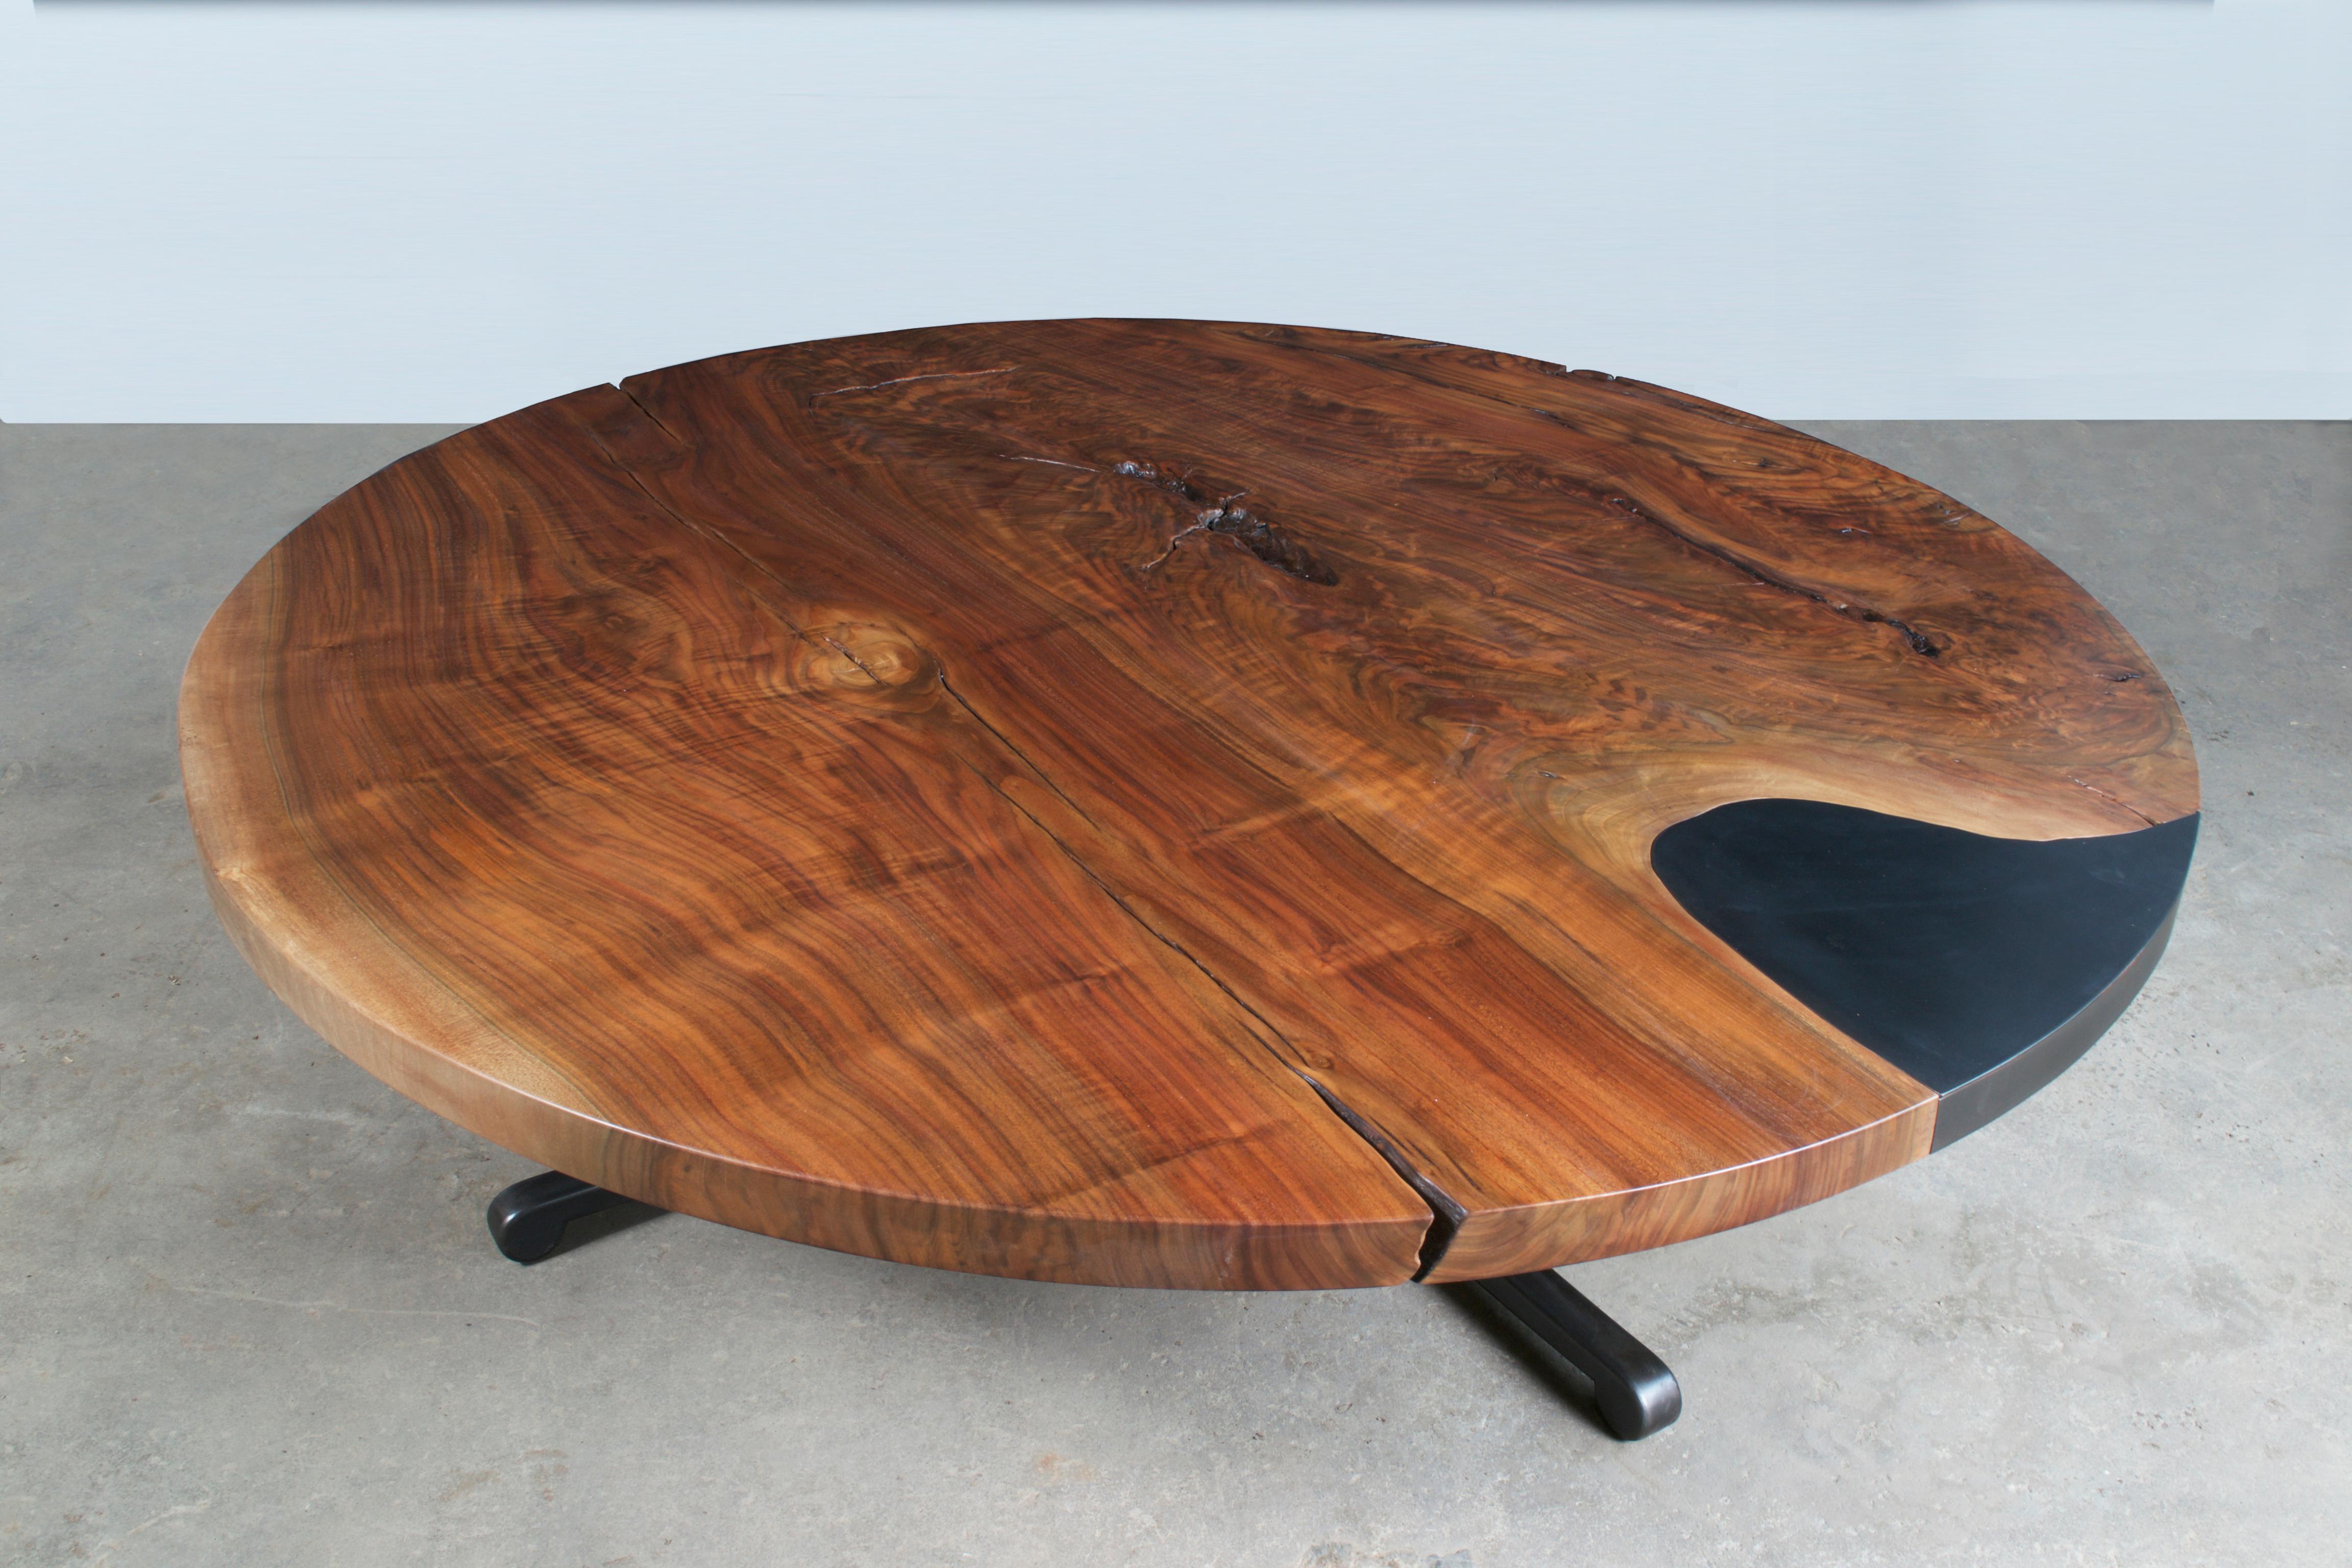 A single slab of highly figured walnut lends a celestial effect to the top of this exquisite Serif Coffee table. Grain matched steel inlay, with removable steel plate revealing hidden storage. Signature Serif leg, shown in raw flame cut finish.